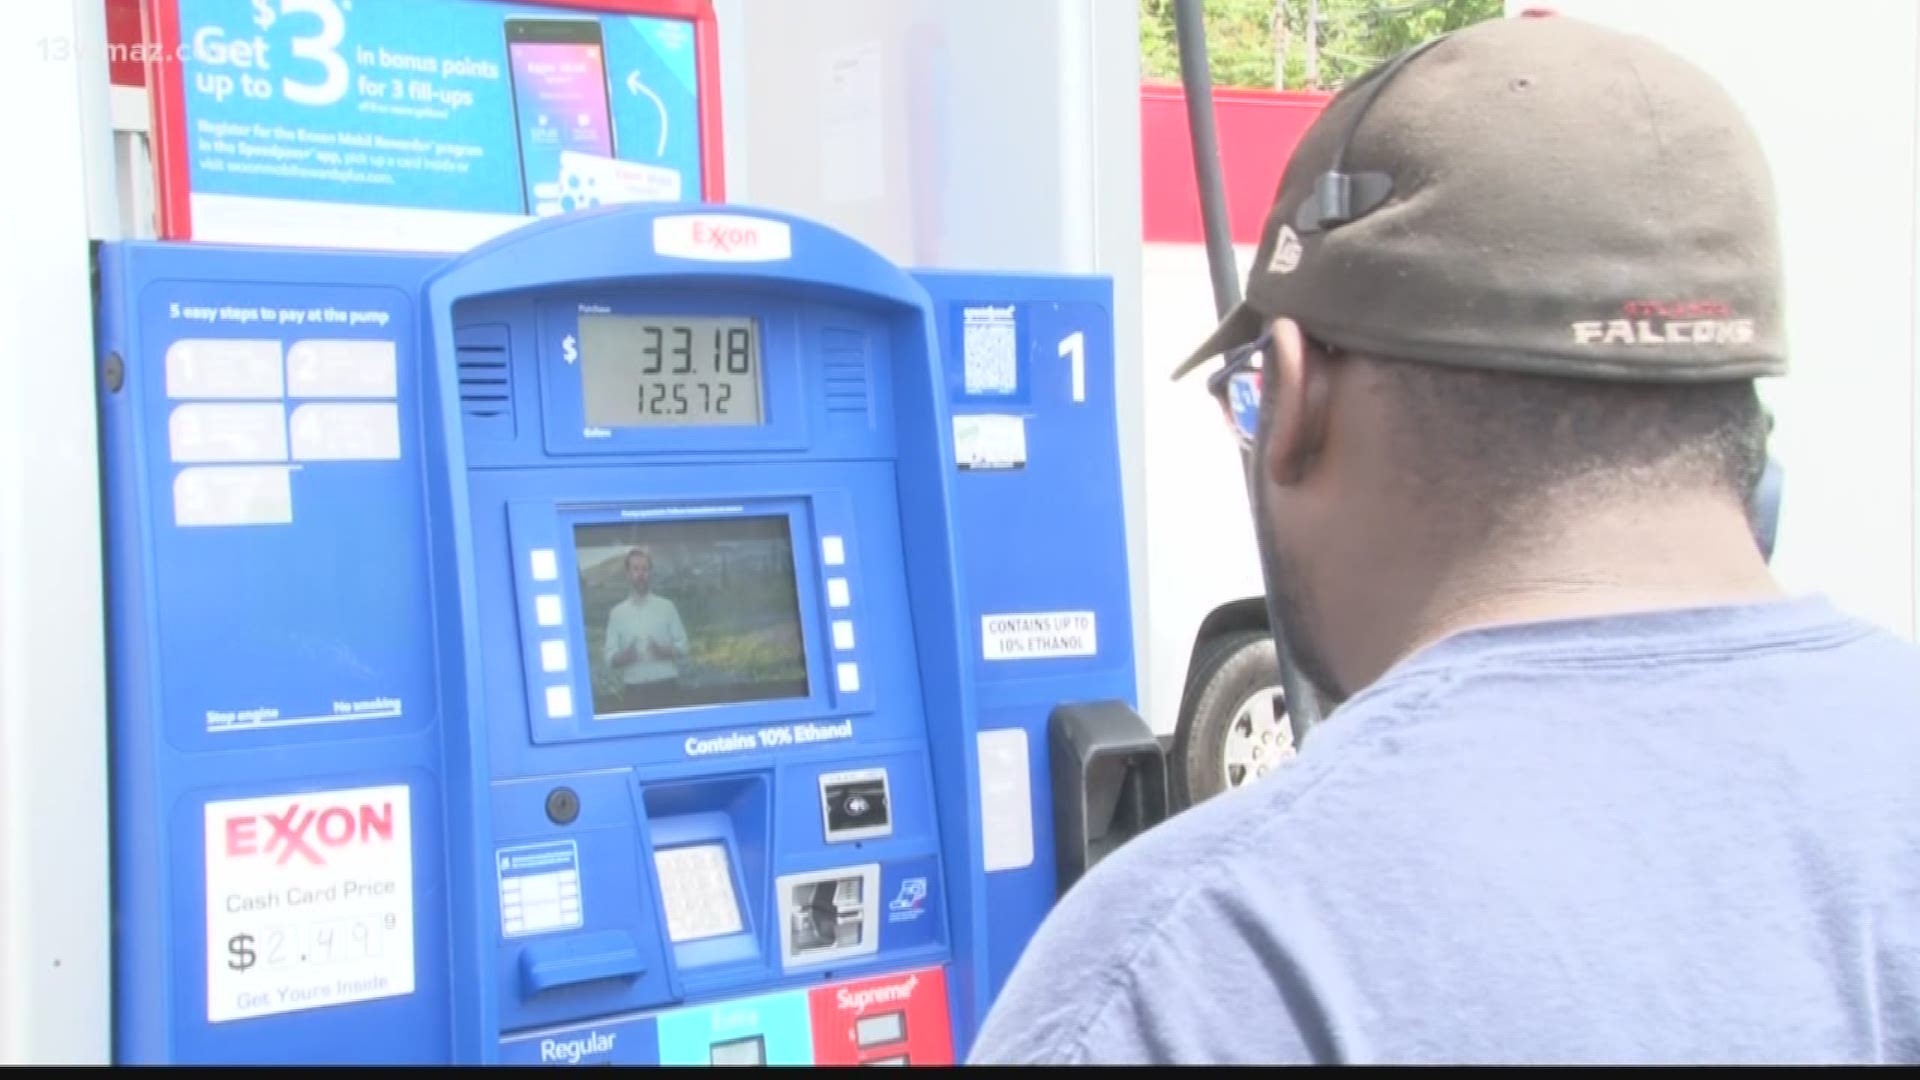 Everyone likes to save money at the pump, and with gas prices on the rise, knowing when to fill up could save you more than just a few cents in the long run.